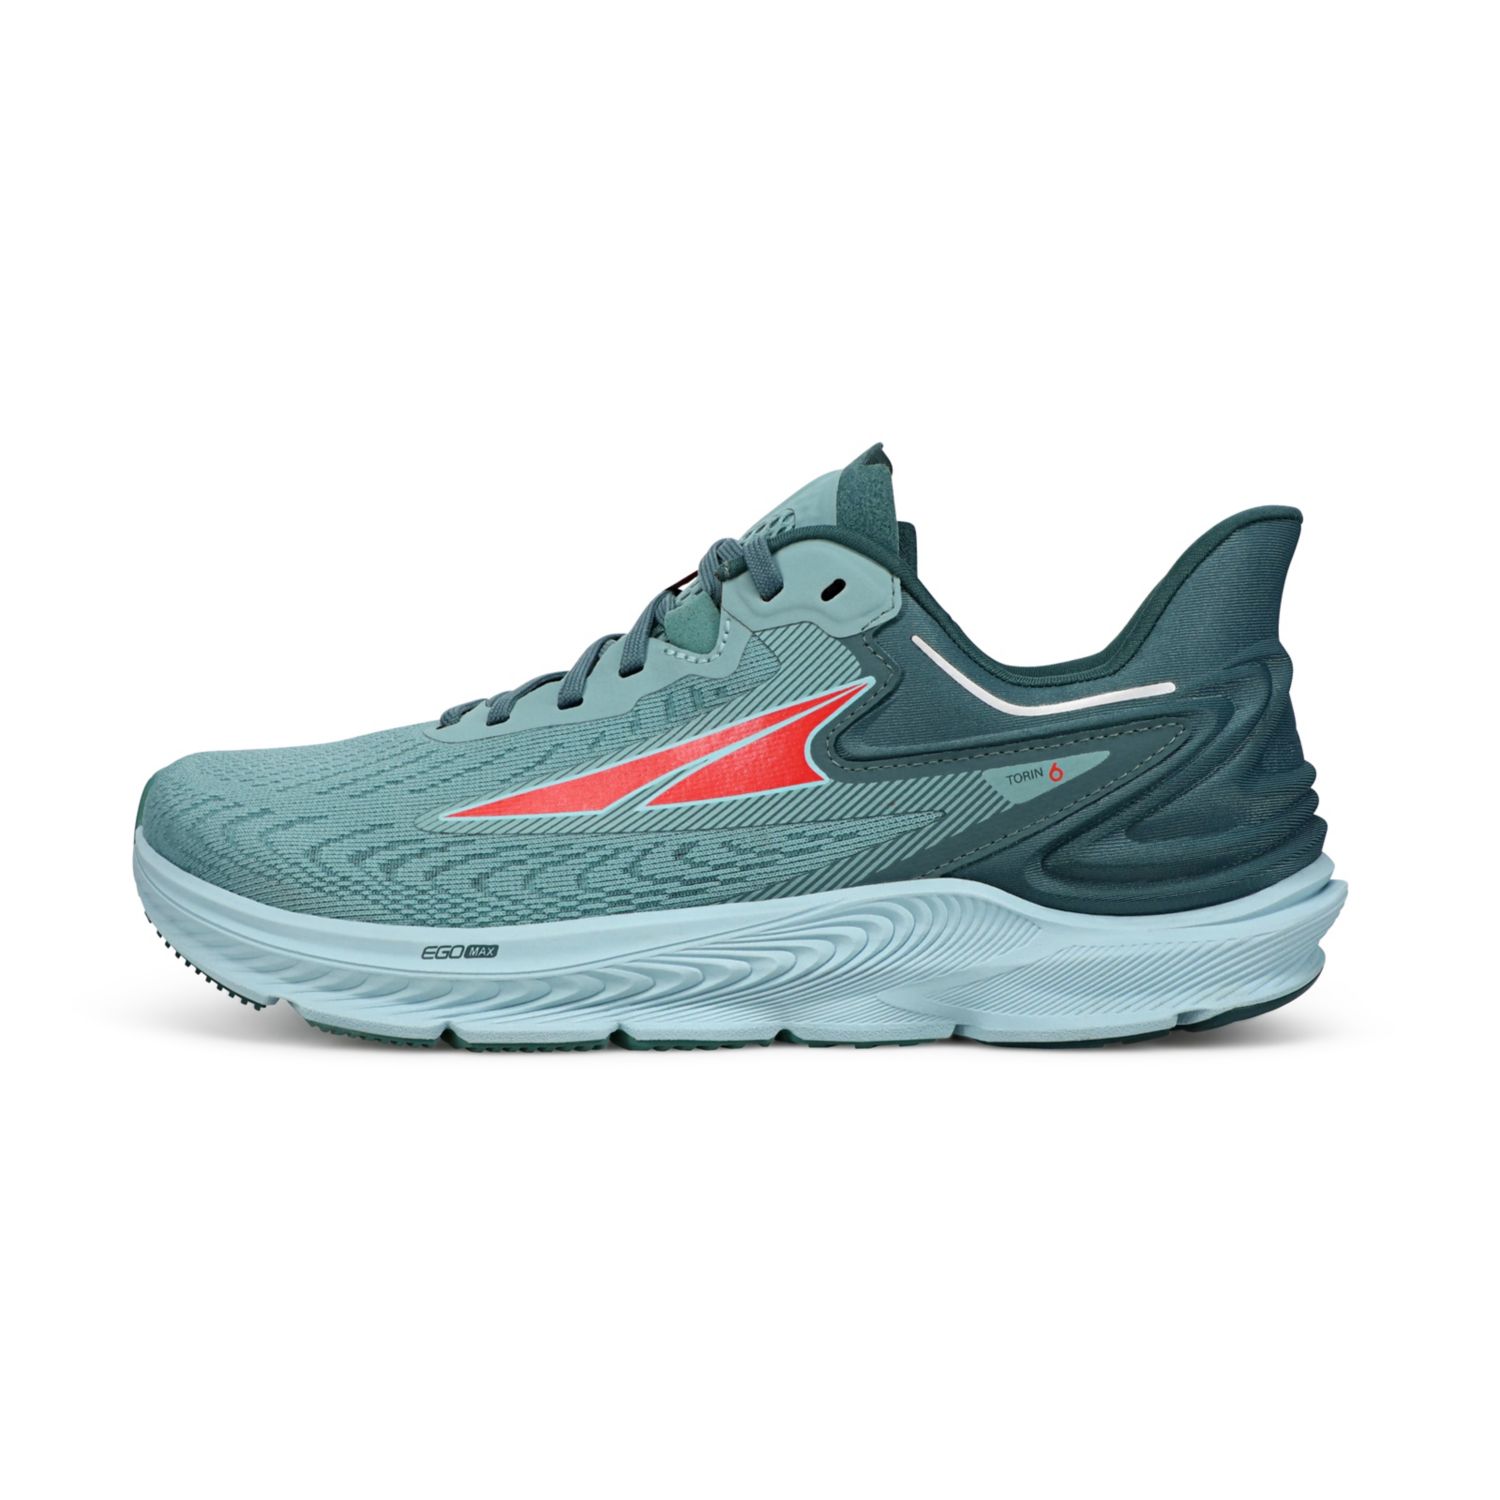 Turquoise Women's Altra Torin 6 Road Running Shoes | Israel-19342789